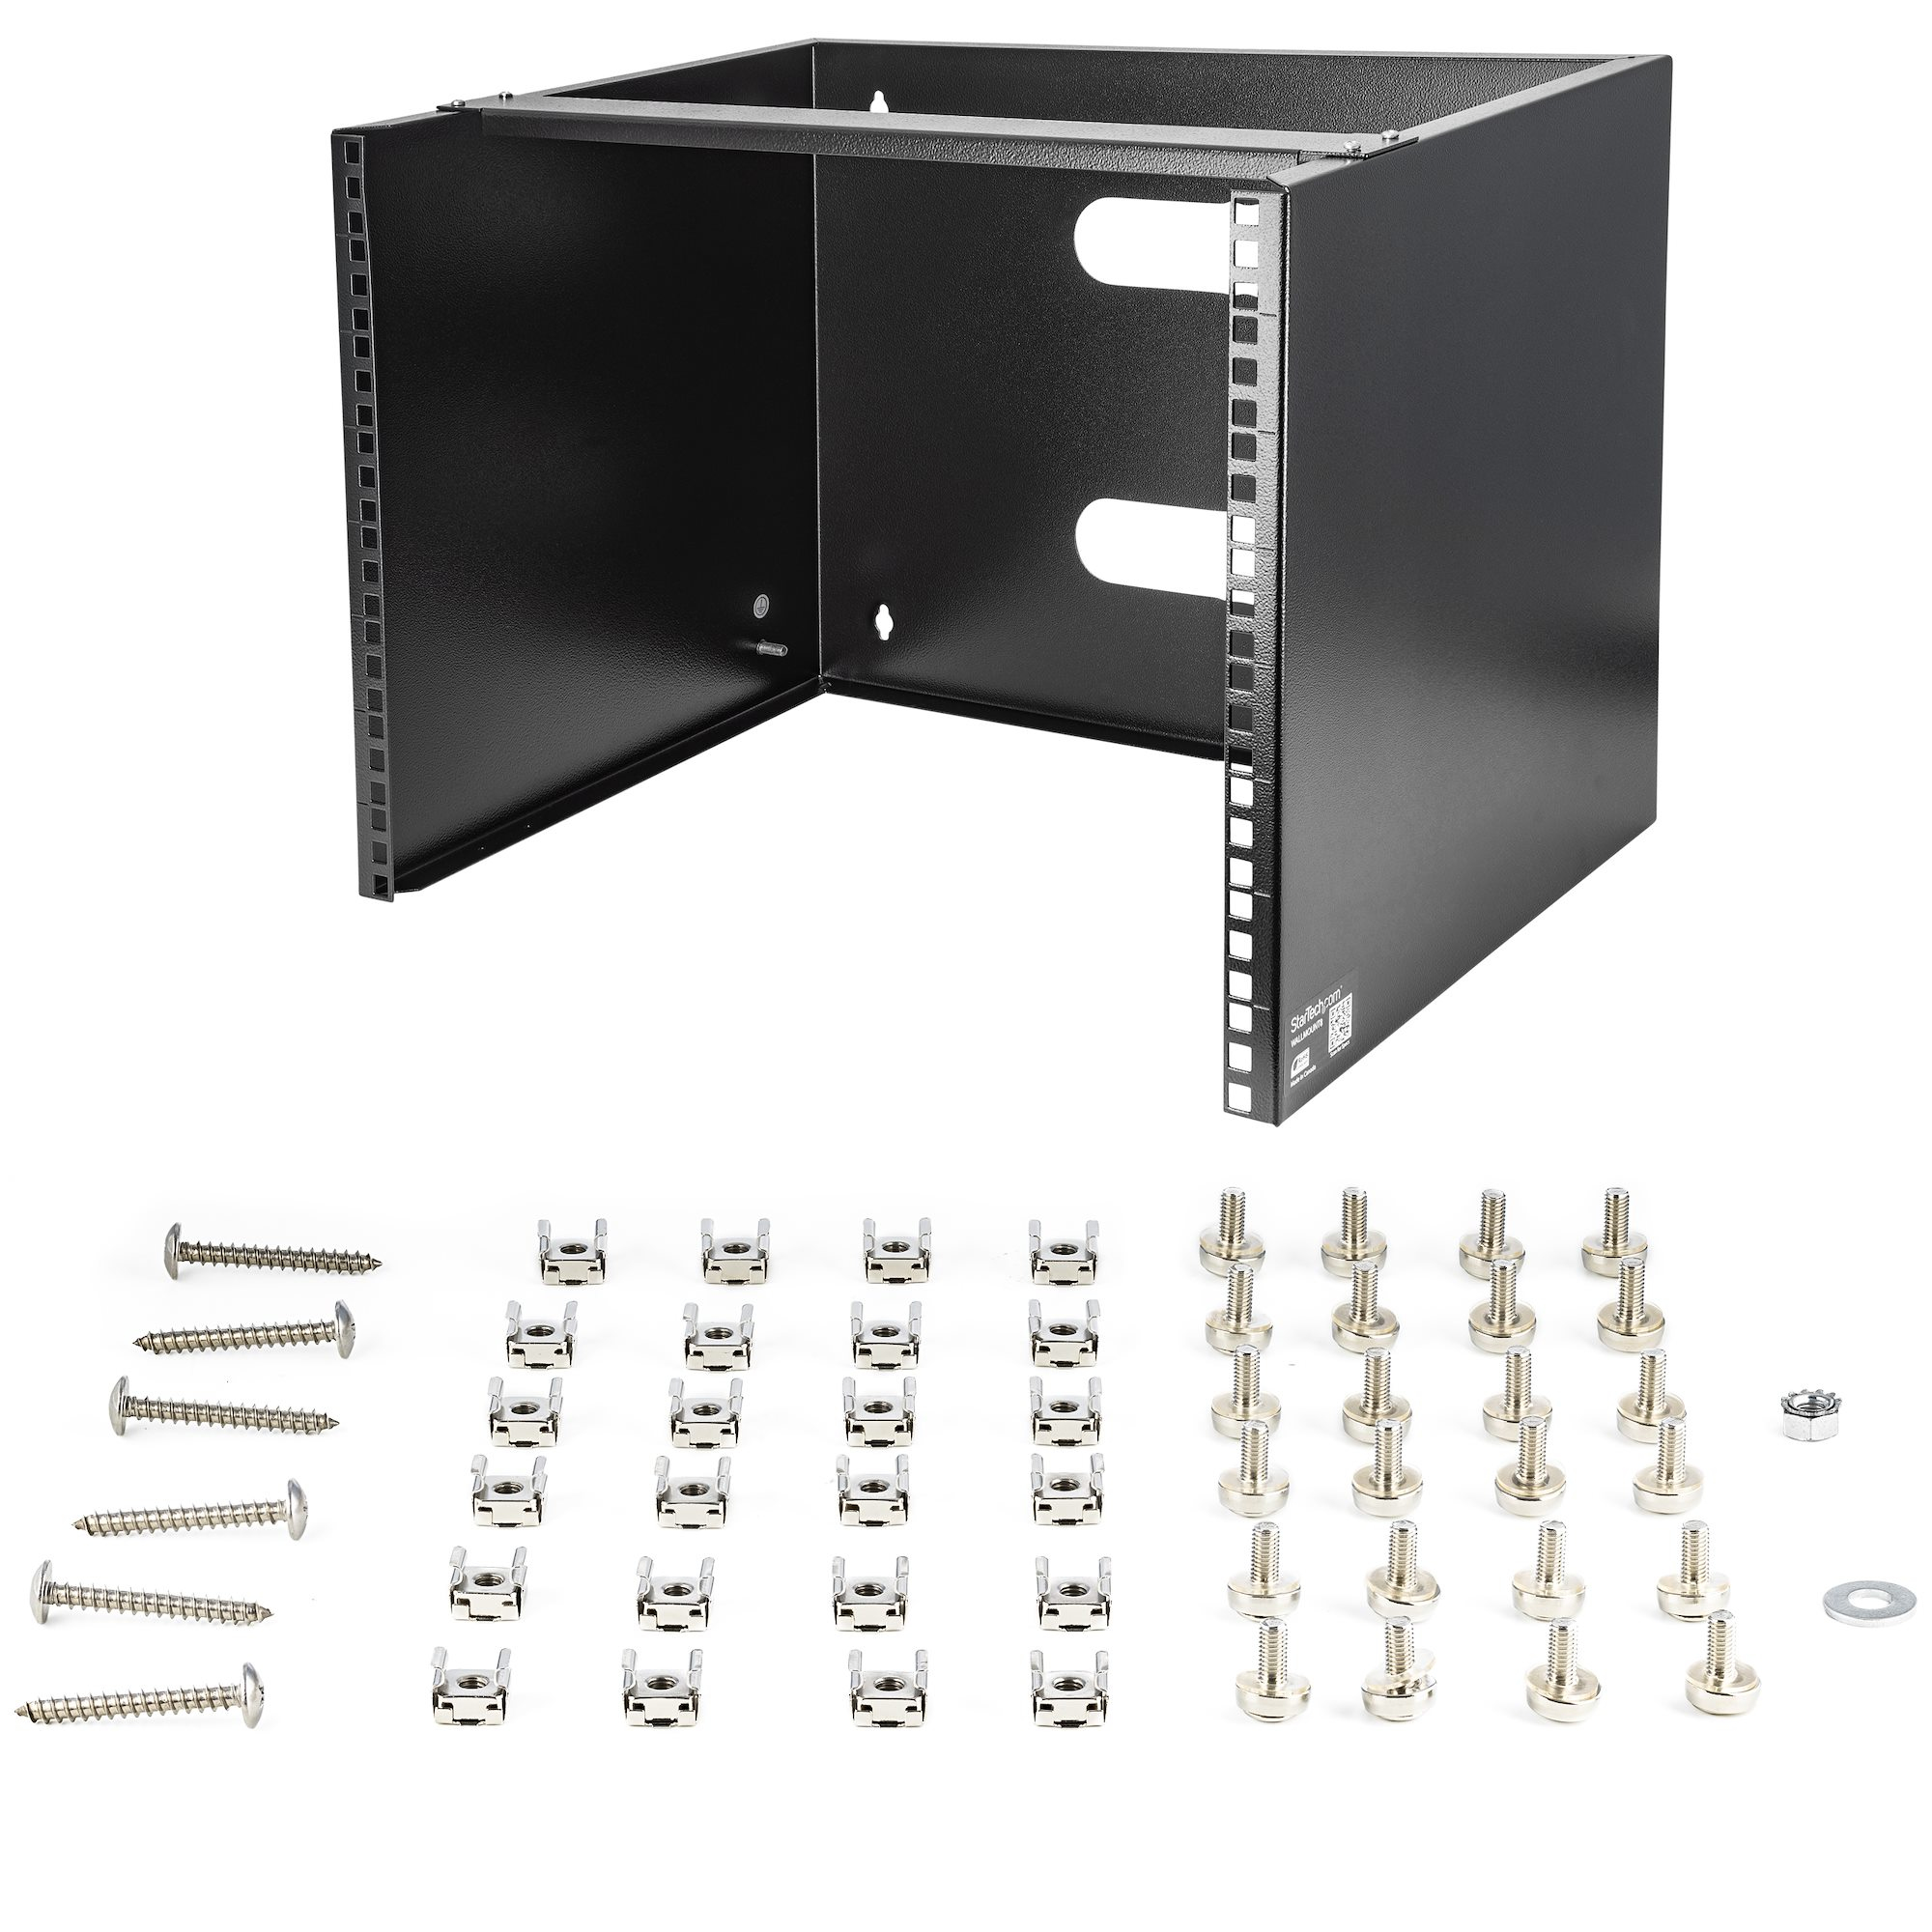 8U Wall Mount Network Rack - 14 Inch Deep (Low Profile) - 19 Patch Panel  Bracket for Shallow Server and IT Equipment, Network Switches - 80lbs/36kg